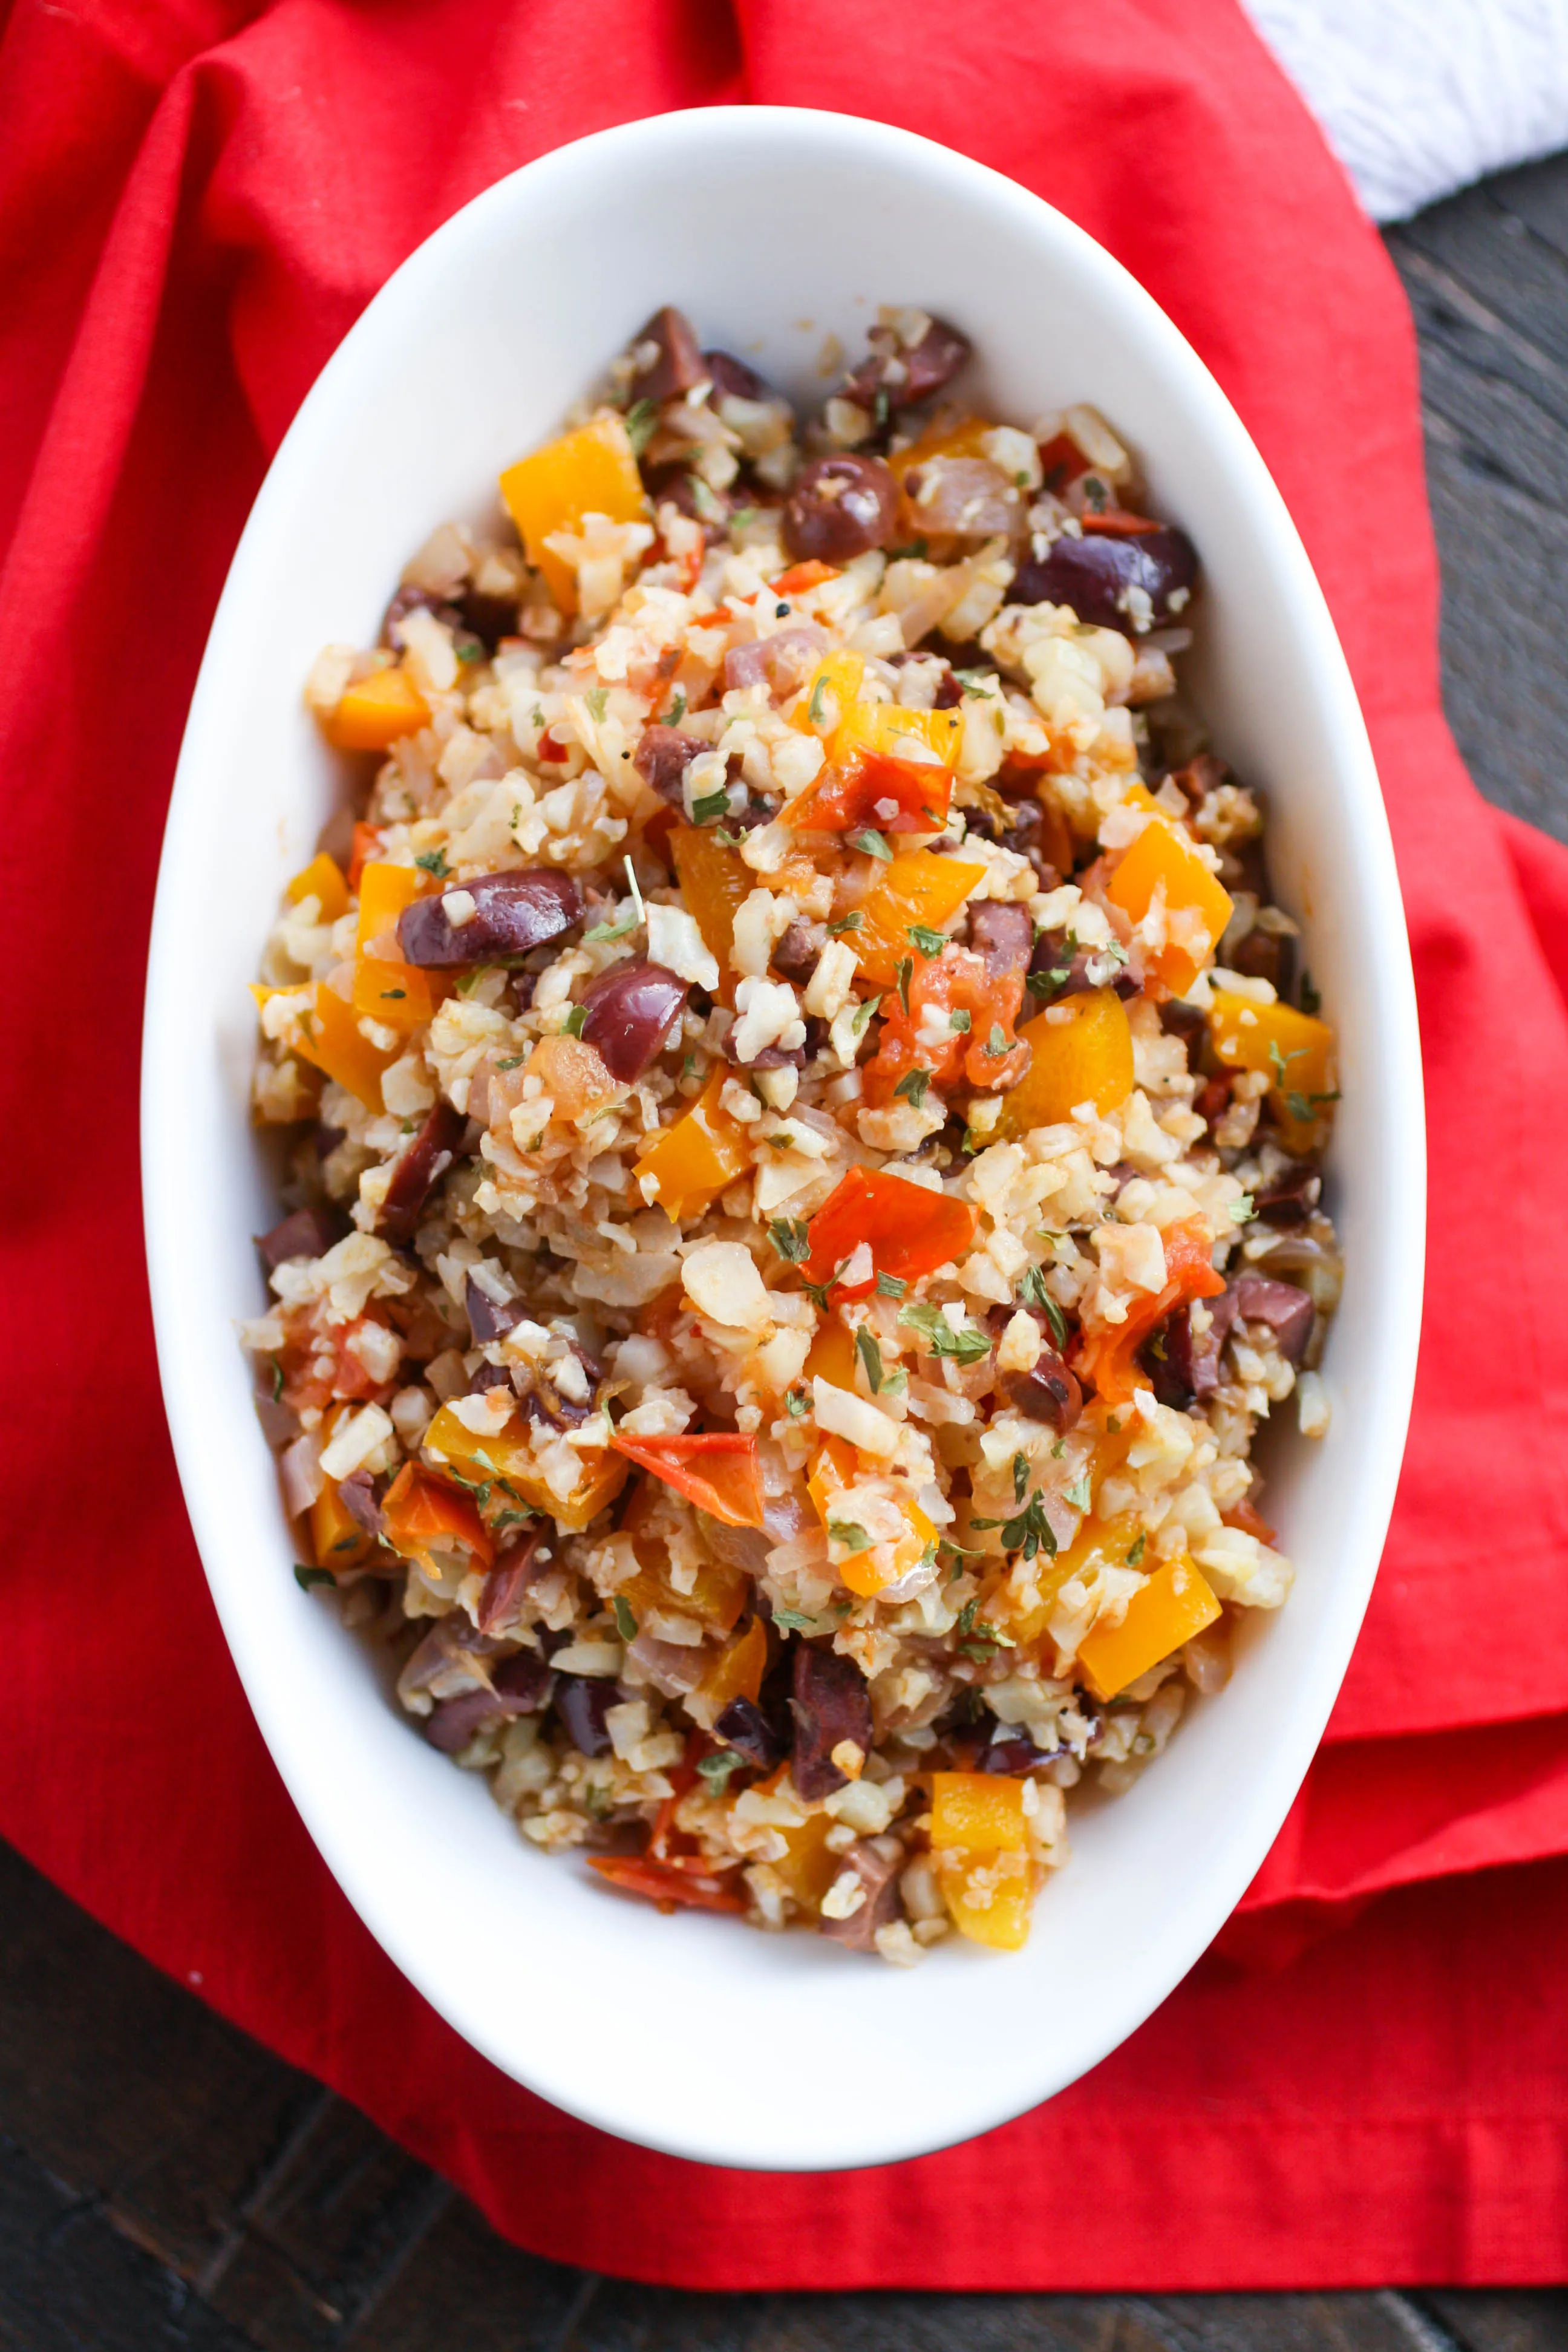 Mediterranean Cauliflower Rice is a colorful and flavorful dish perfect for any meal. This cauliflower rice dish is from the American Diabetes Association and it's delicious!